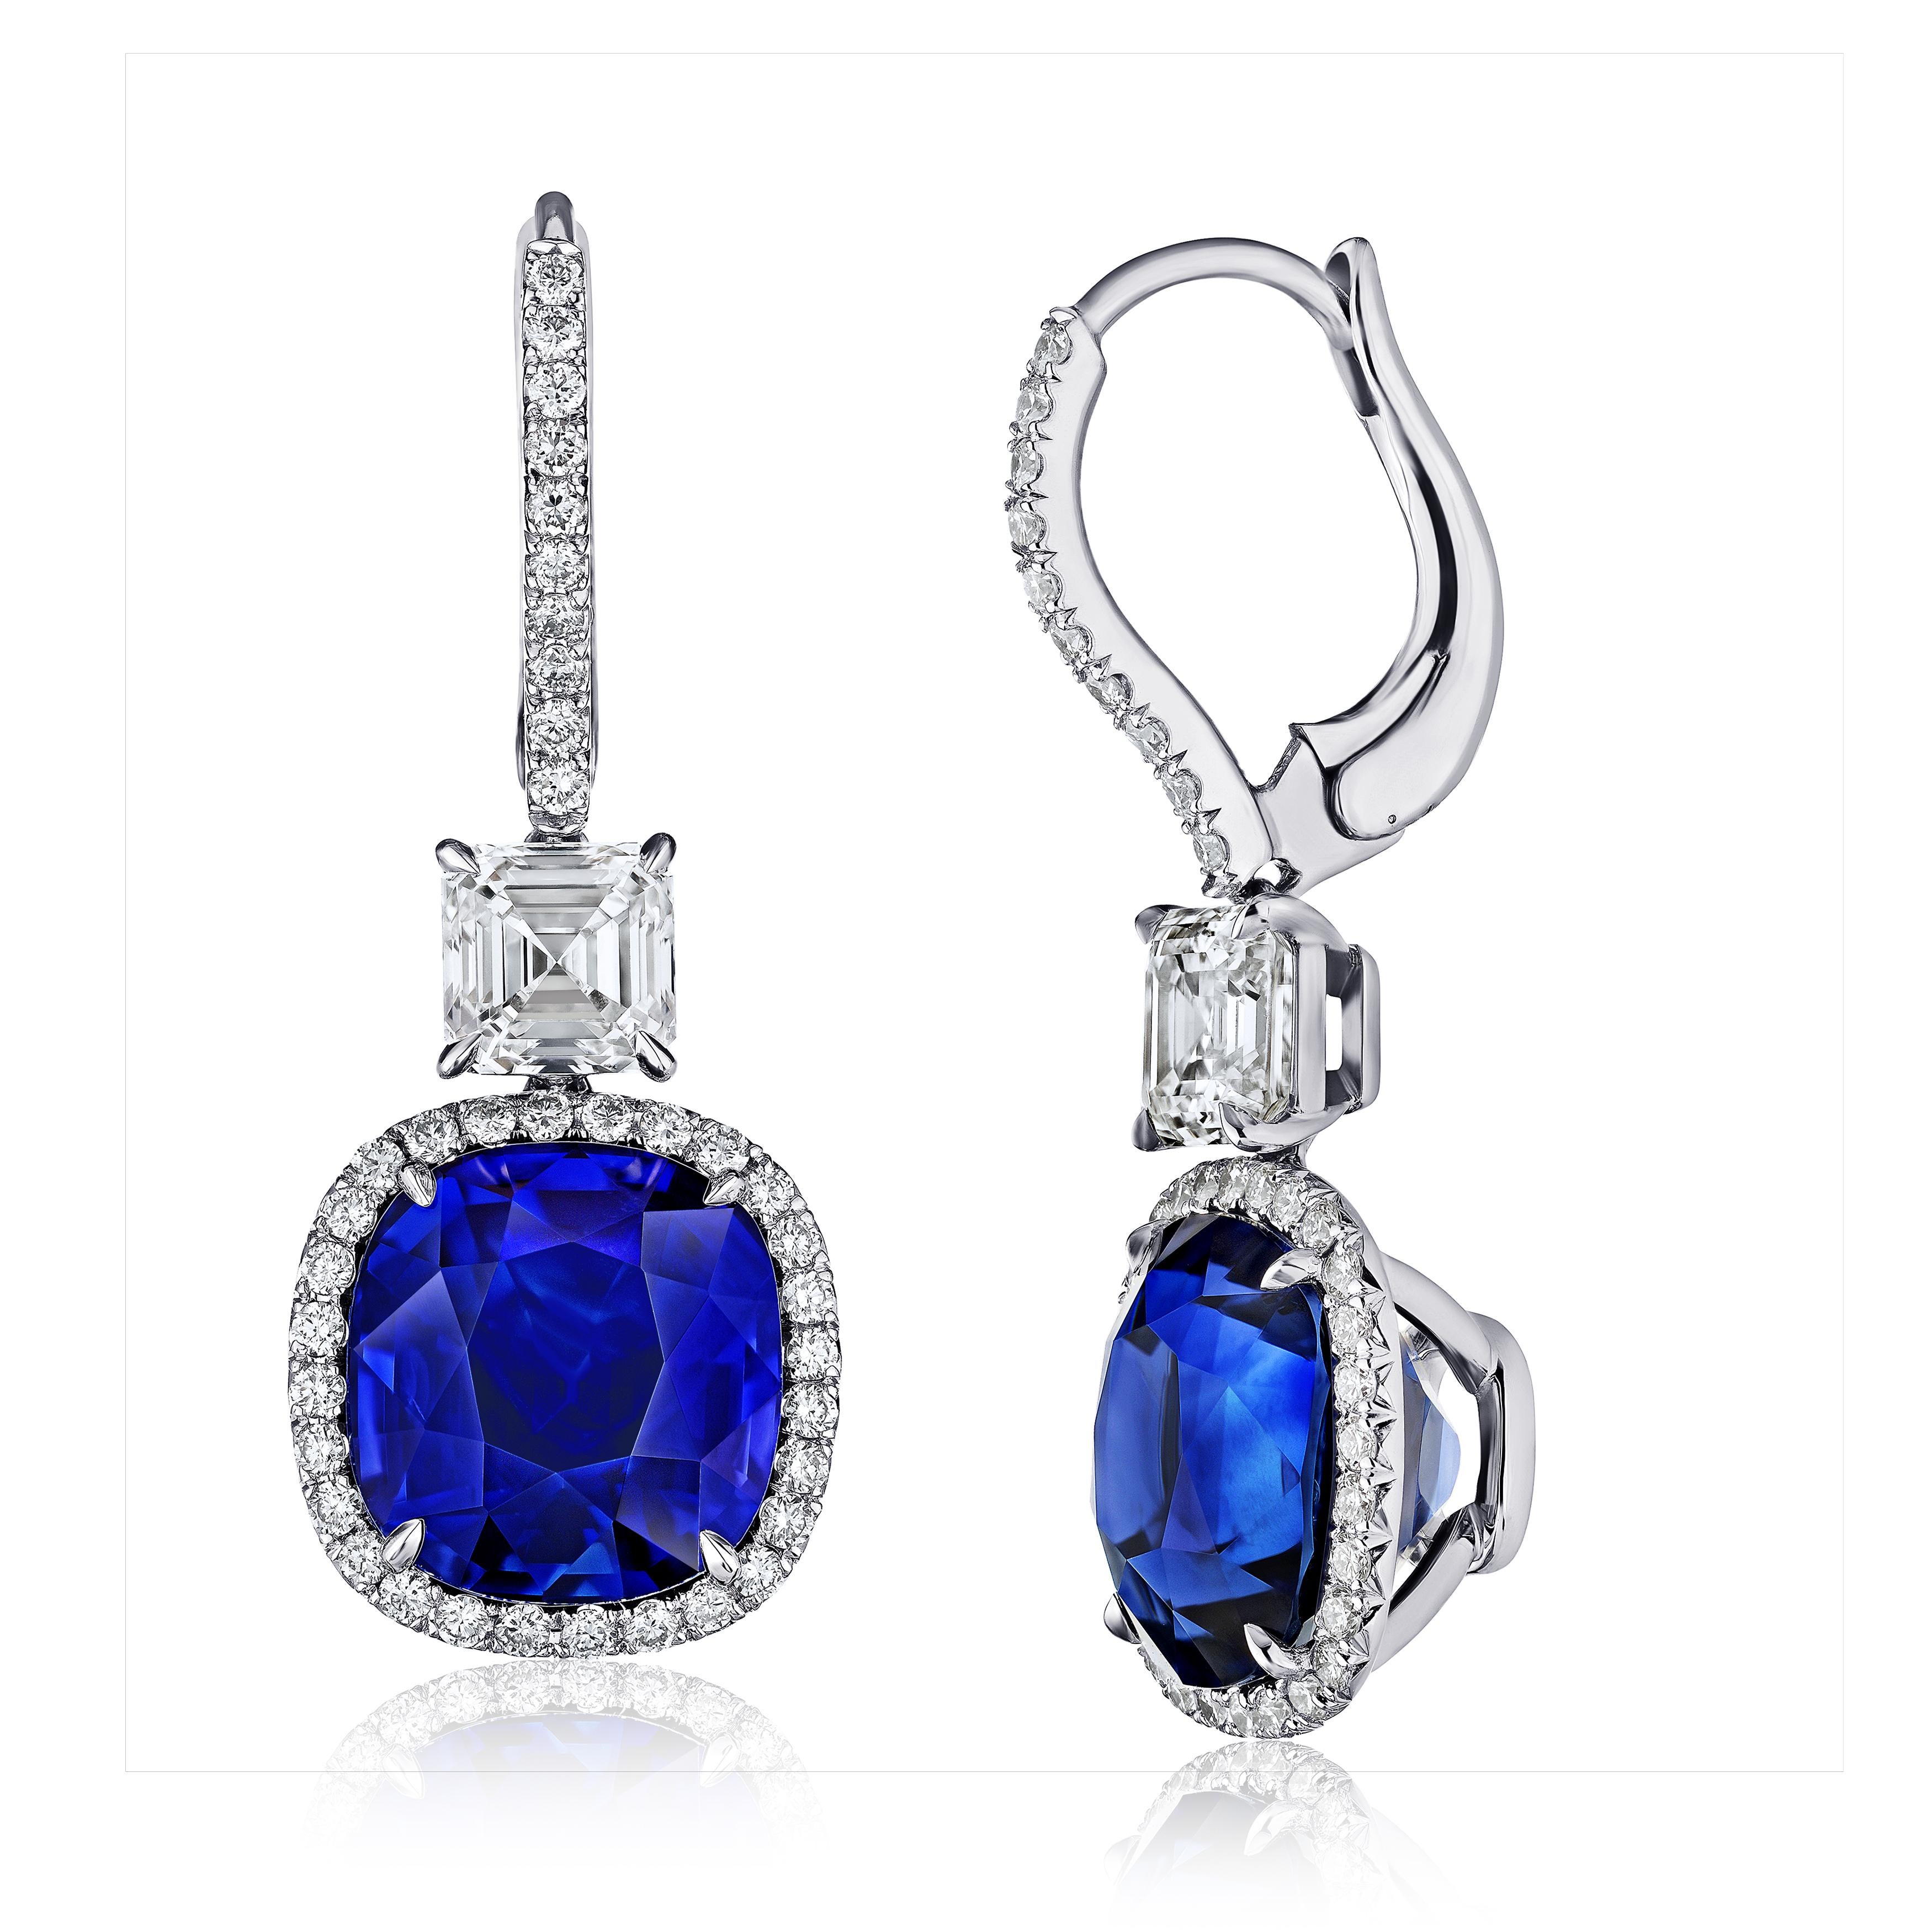 Blue Sapphire and Diamond Drop Earrings, with a total Sapphire weight of 11.94 carats and two asscher cut diamonds 1.50 carats (GIA E-F / VVS)  surrounded by  76 round brilliandt cut diamonds .68 carats  all platinum with lever backs